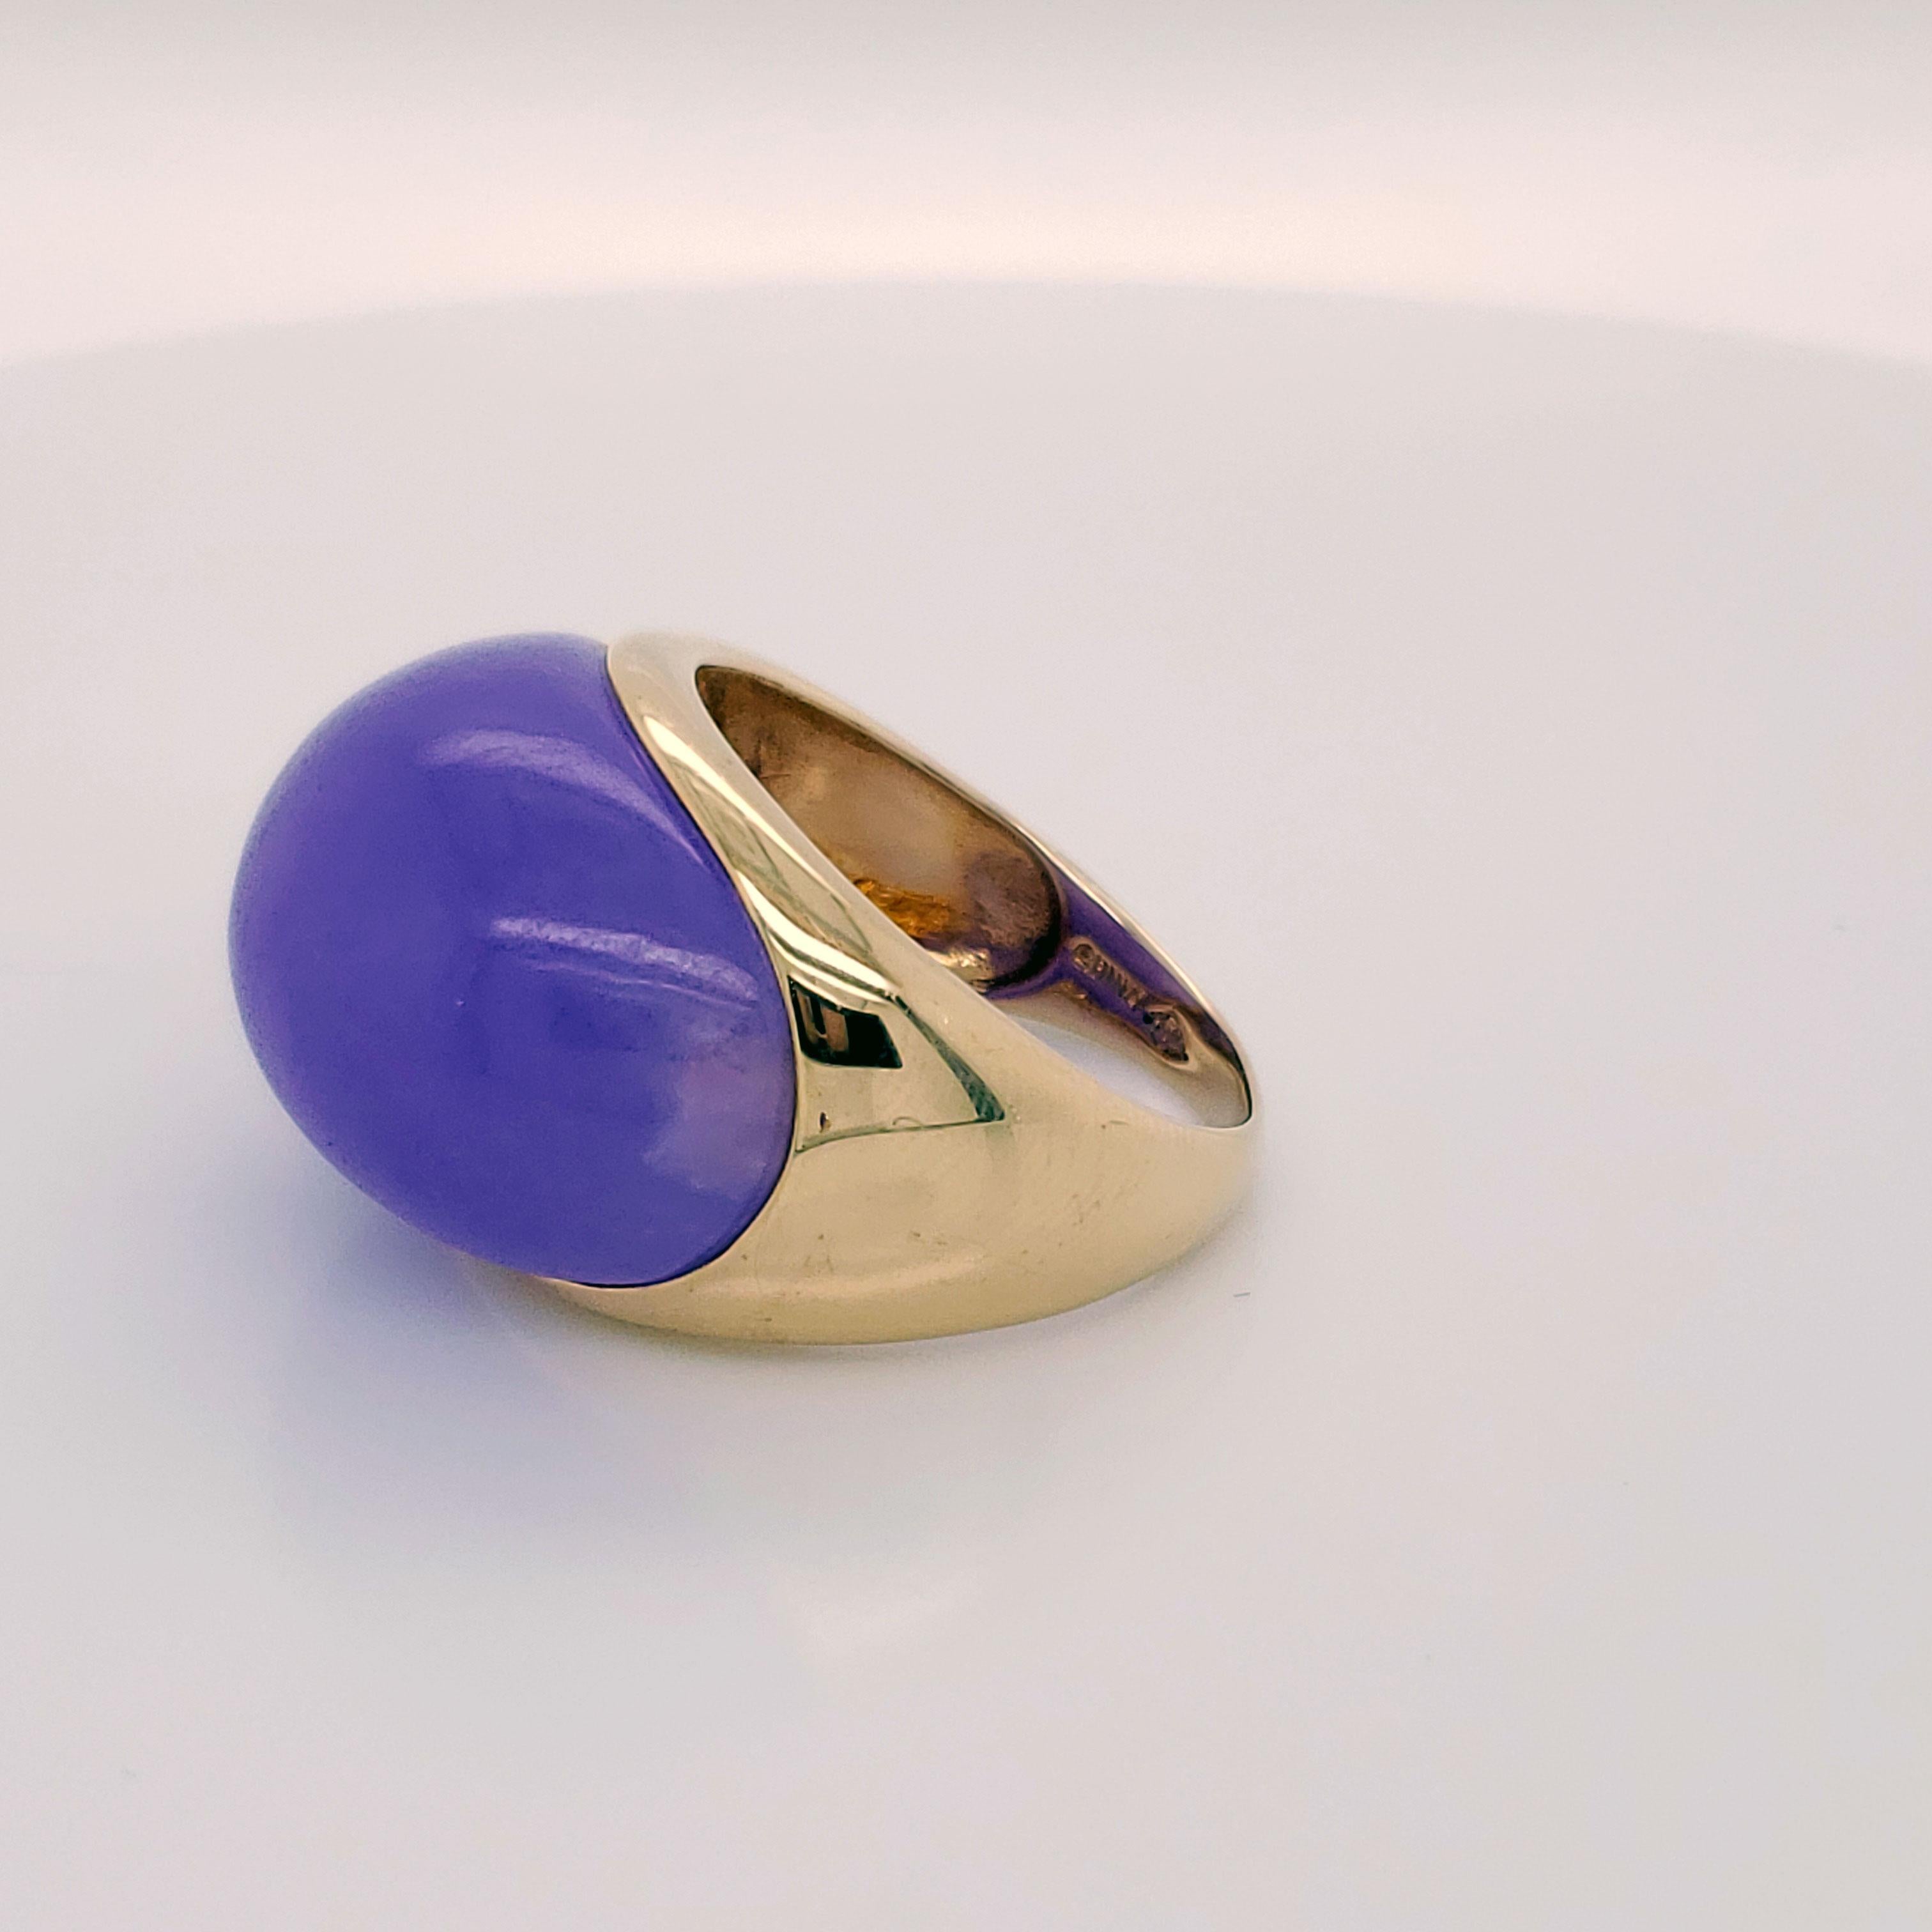 This ring is just as bold as you! Made of real lavender jade set in 14K yellow gold, this stunning ring is sure to turn heads! The gorgeous lavender jade is the perfect pair to this yellow gold setting, and the perfect compliment to any skin tone!